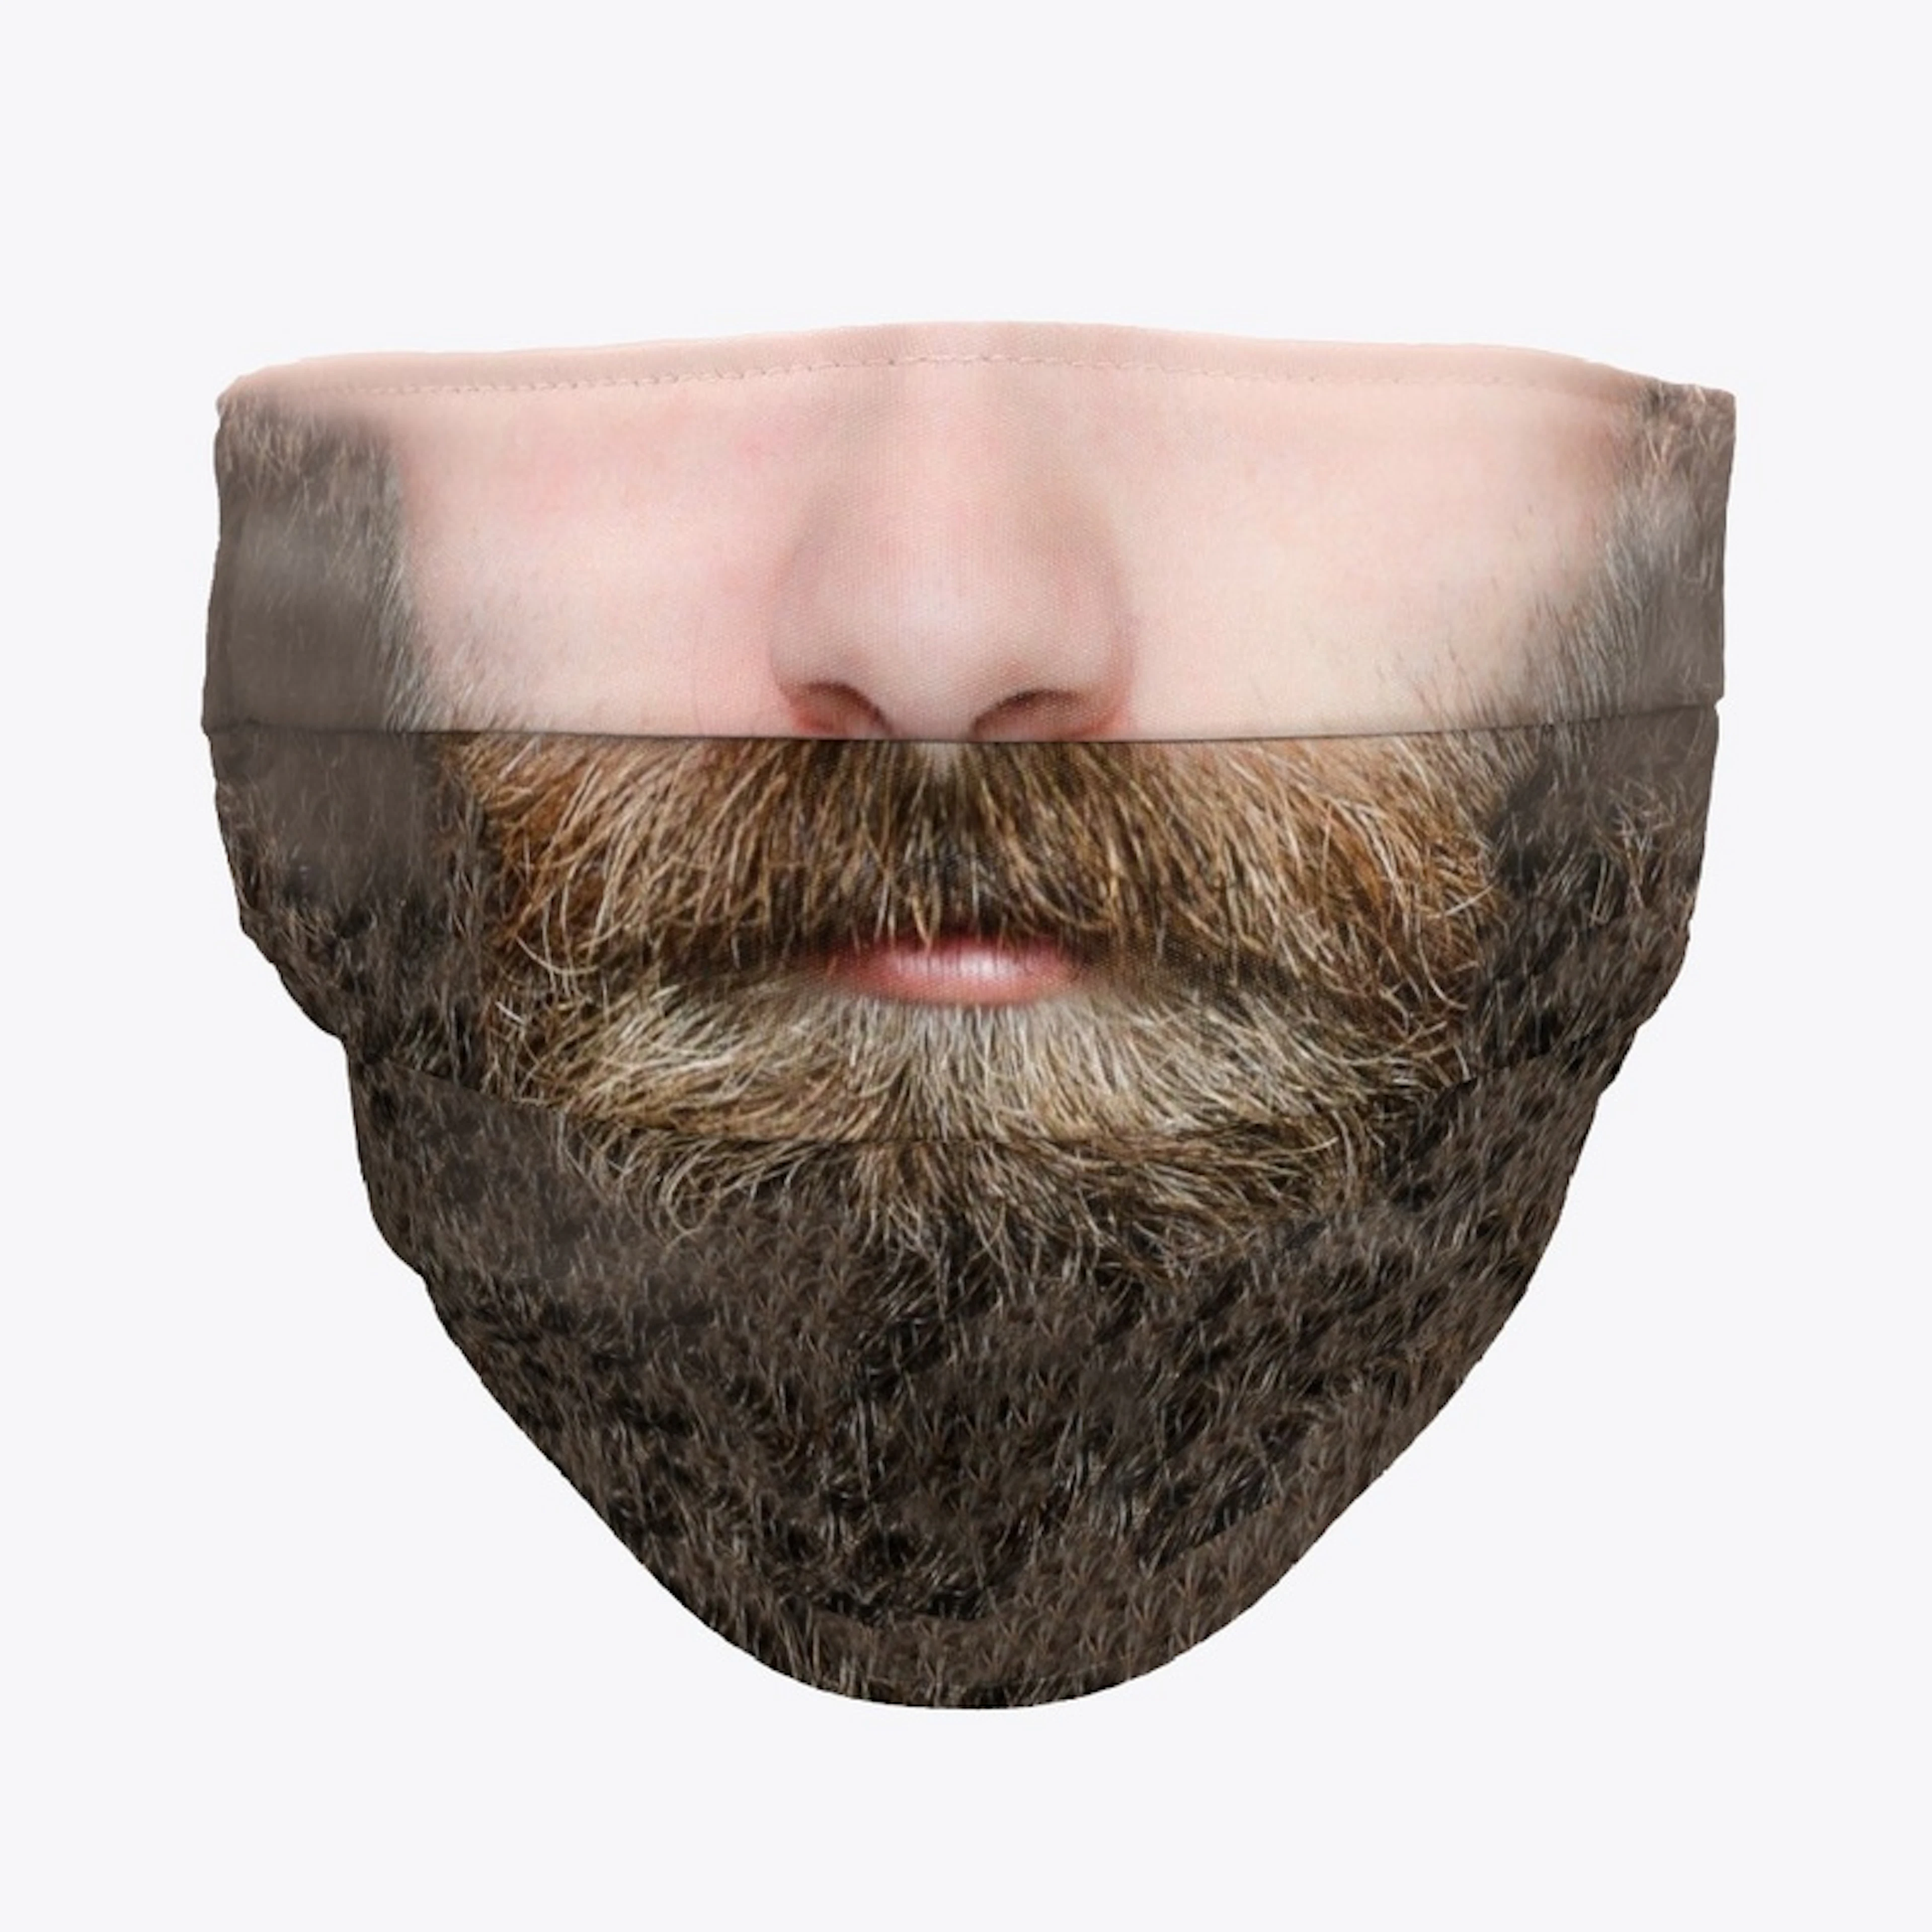 Manly beard printed on a face mask